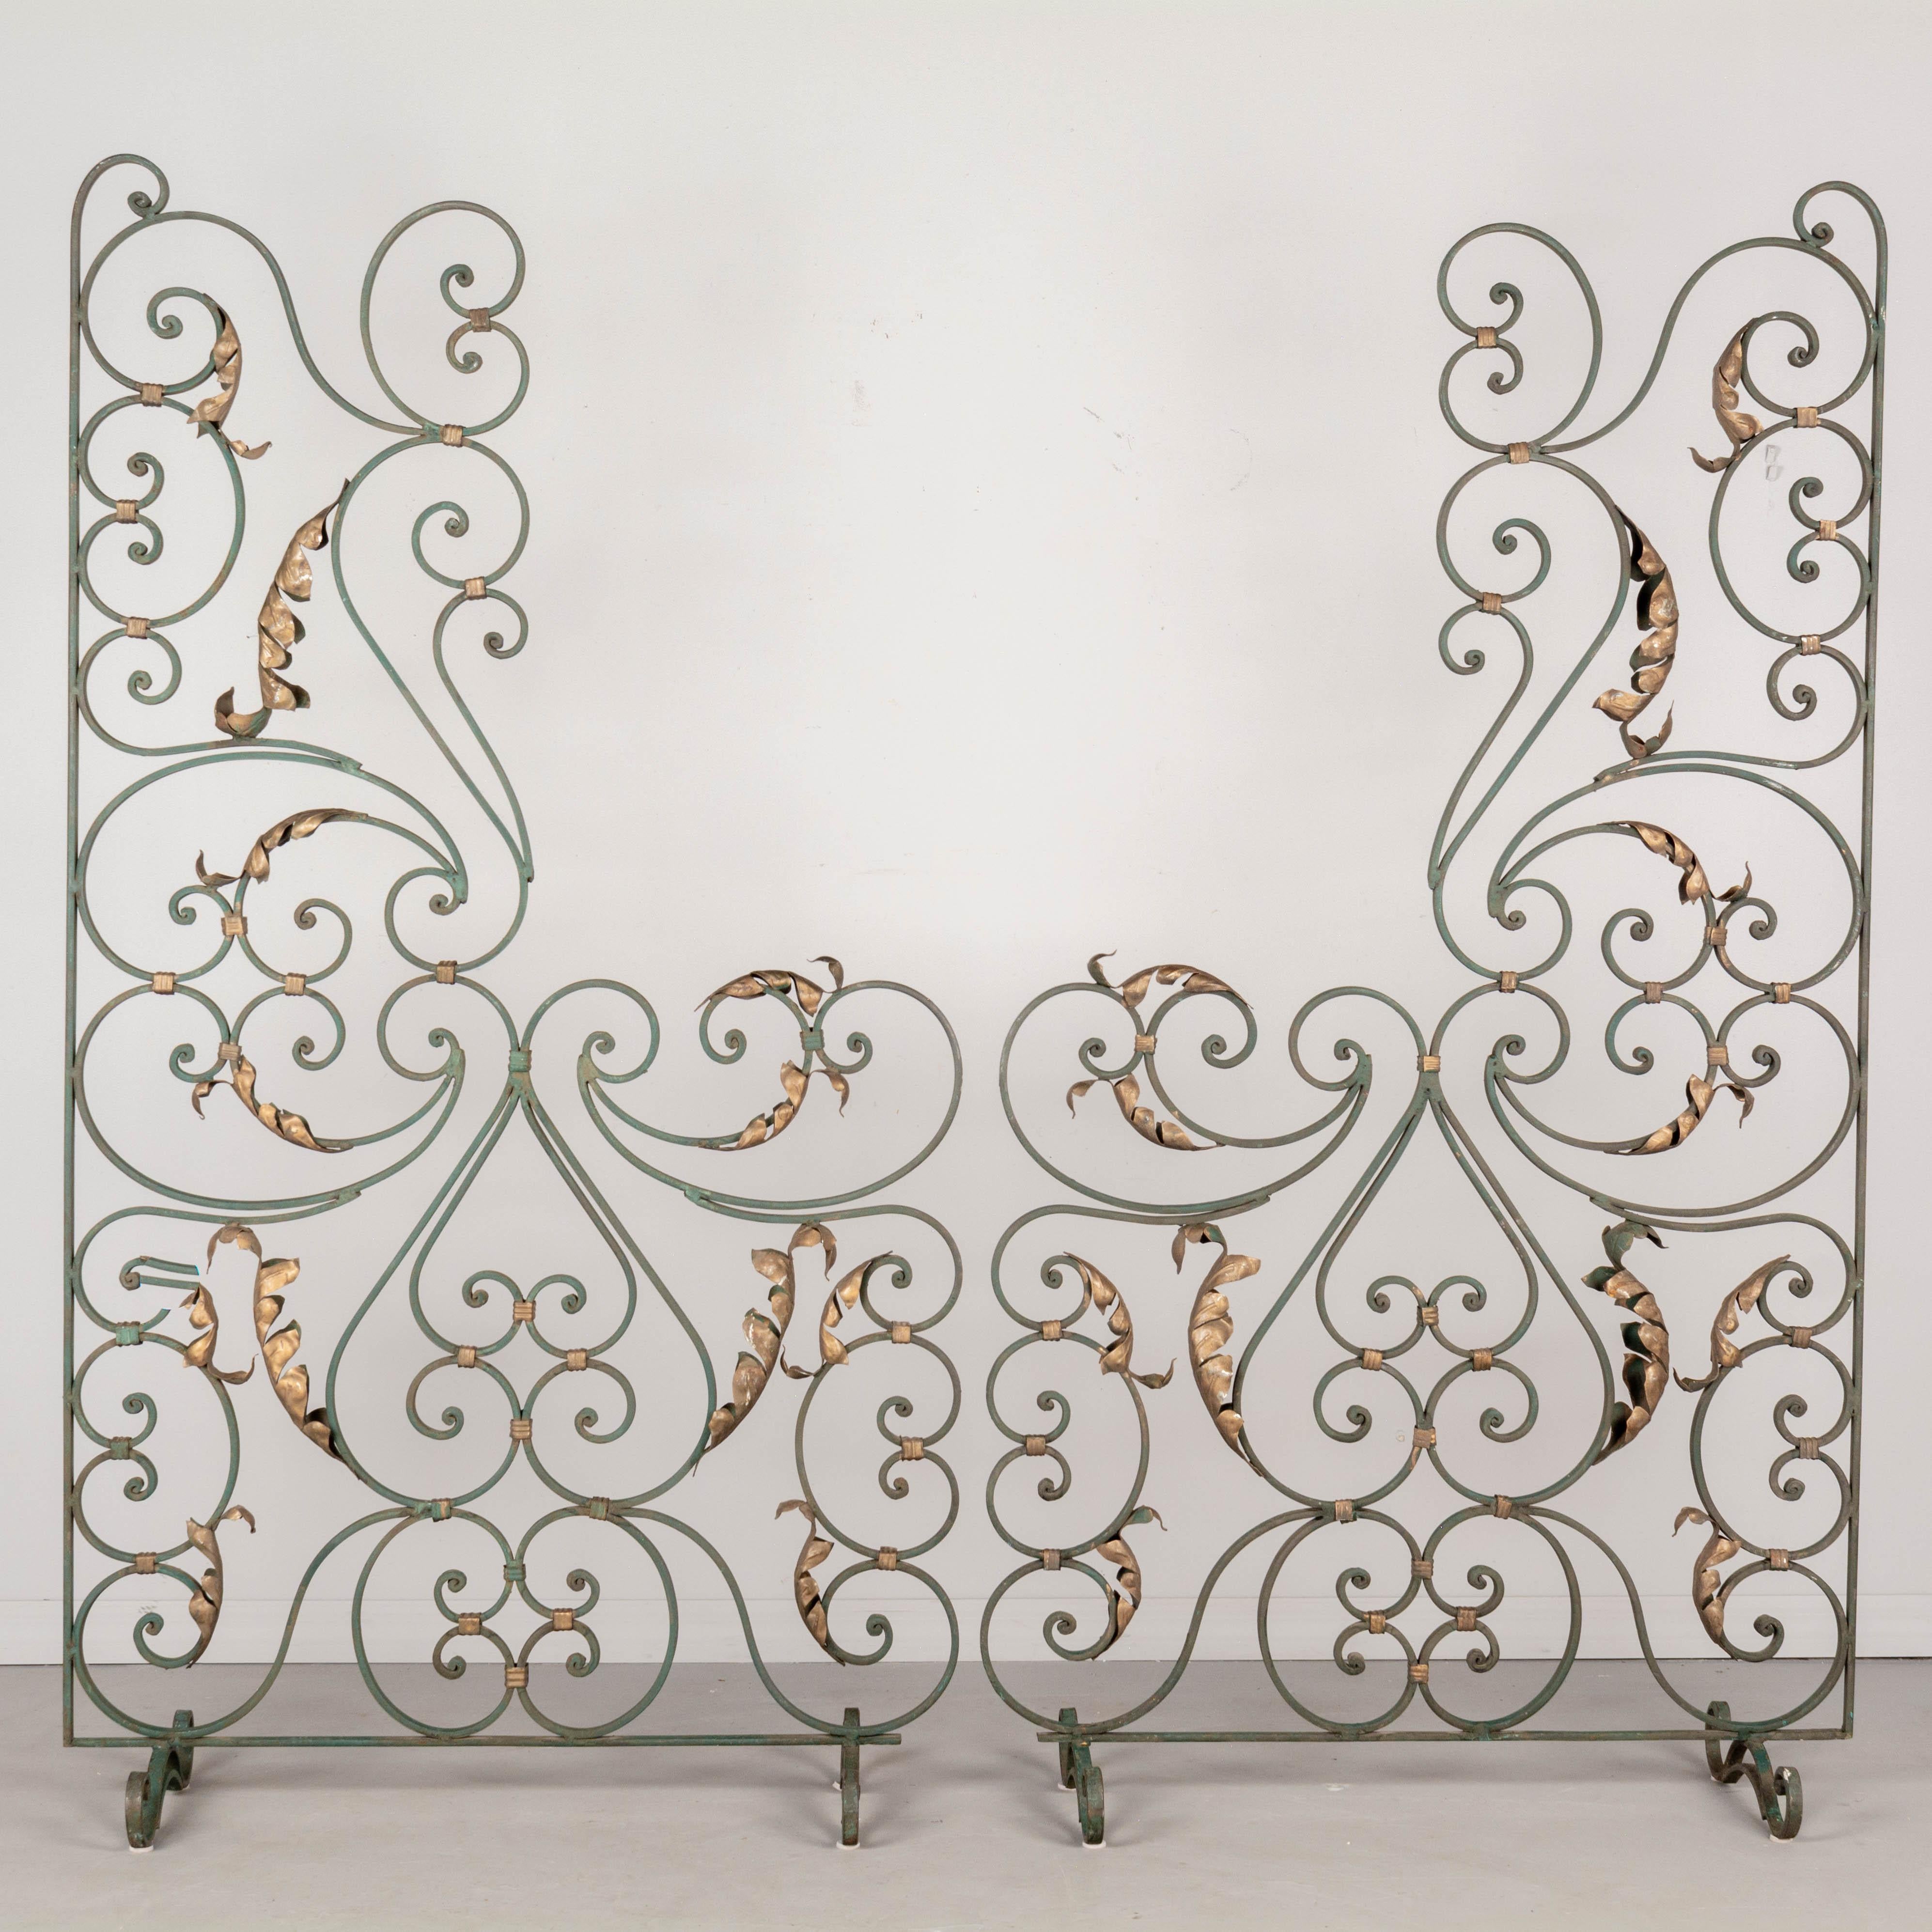 20th Century Pair of French Wrought Iron Screens or Room Dividers For Sale